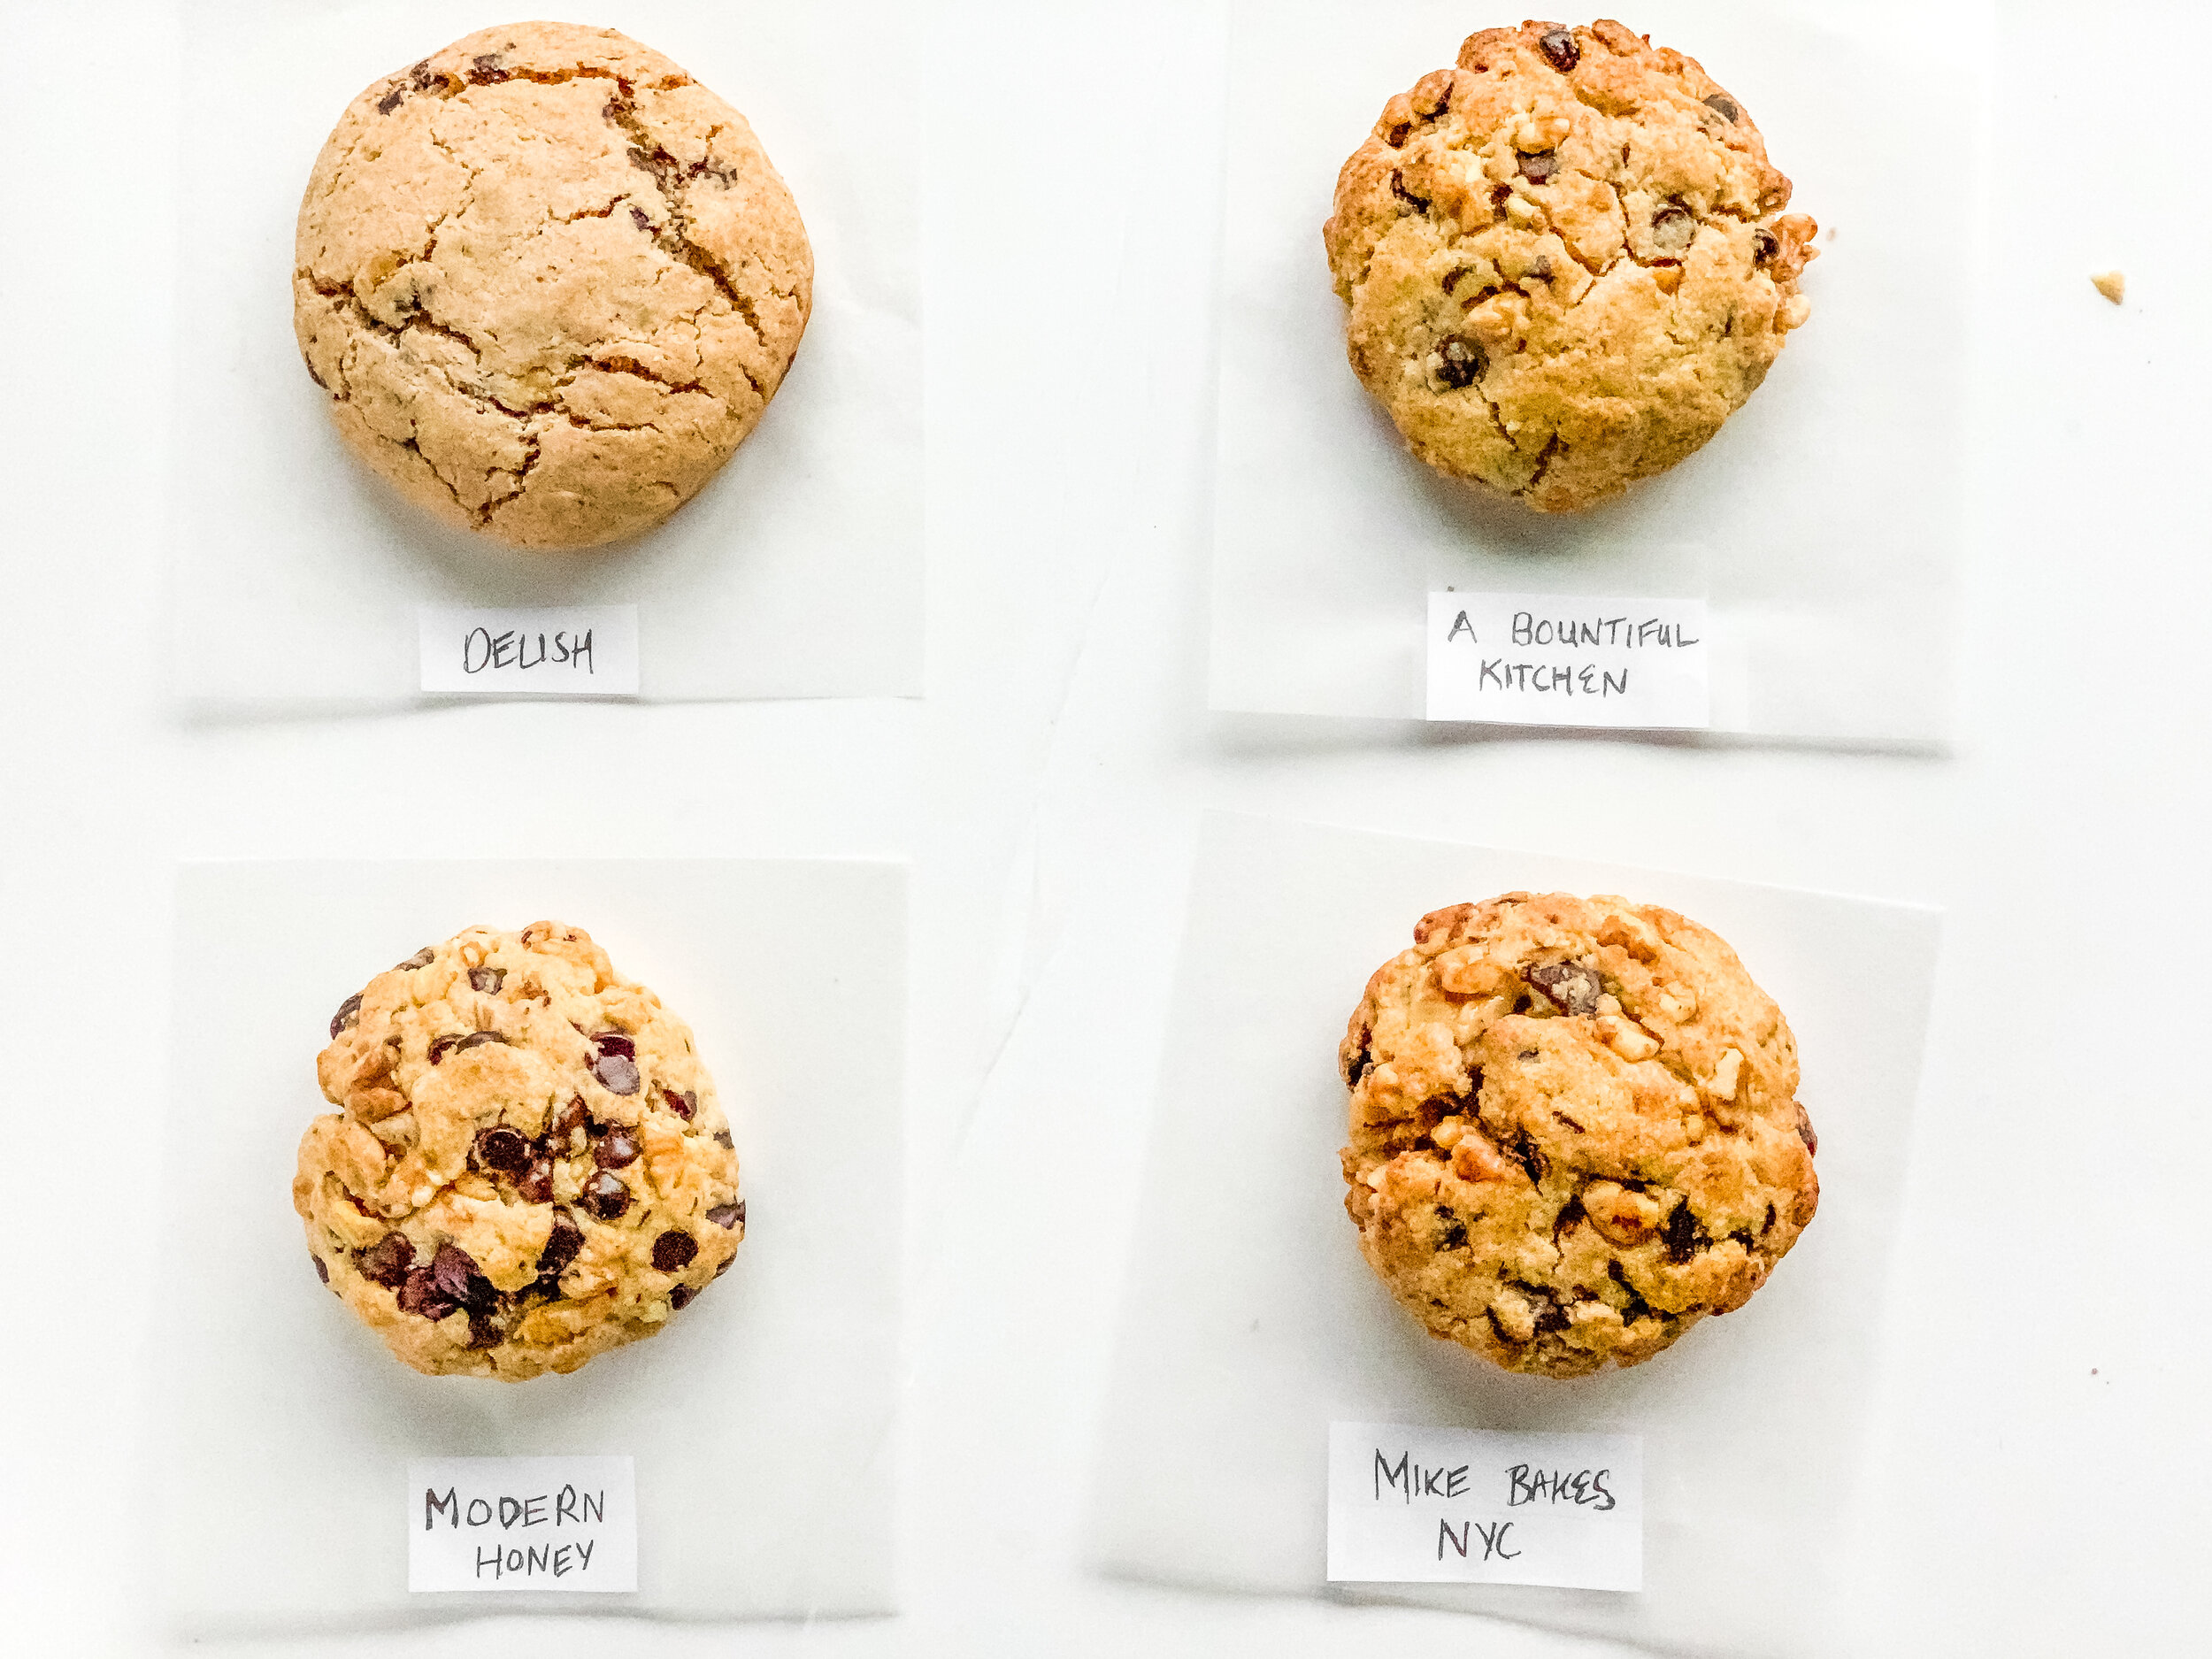 New York-Based Levain Bakery, Known for Huge Cookies, Opens in